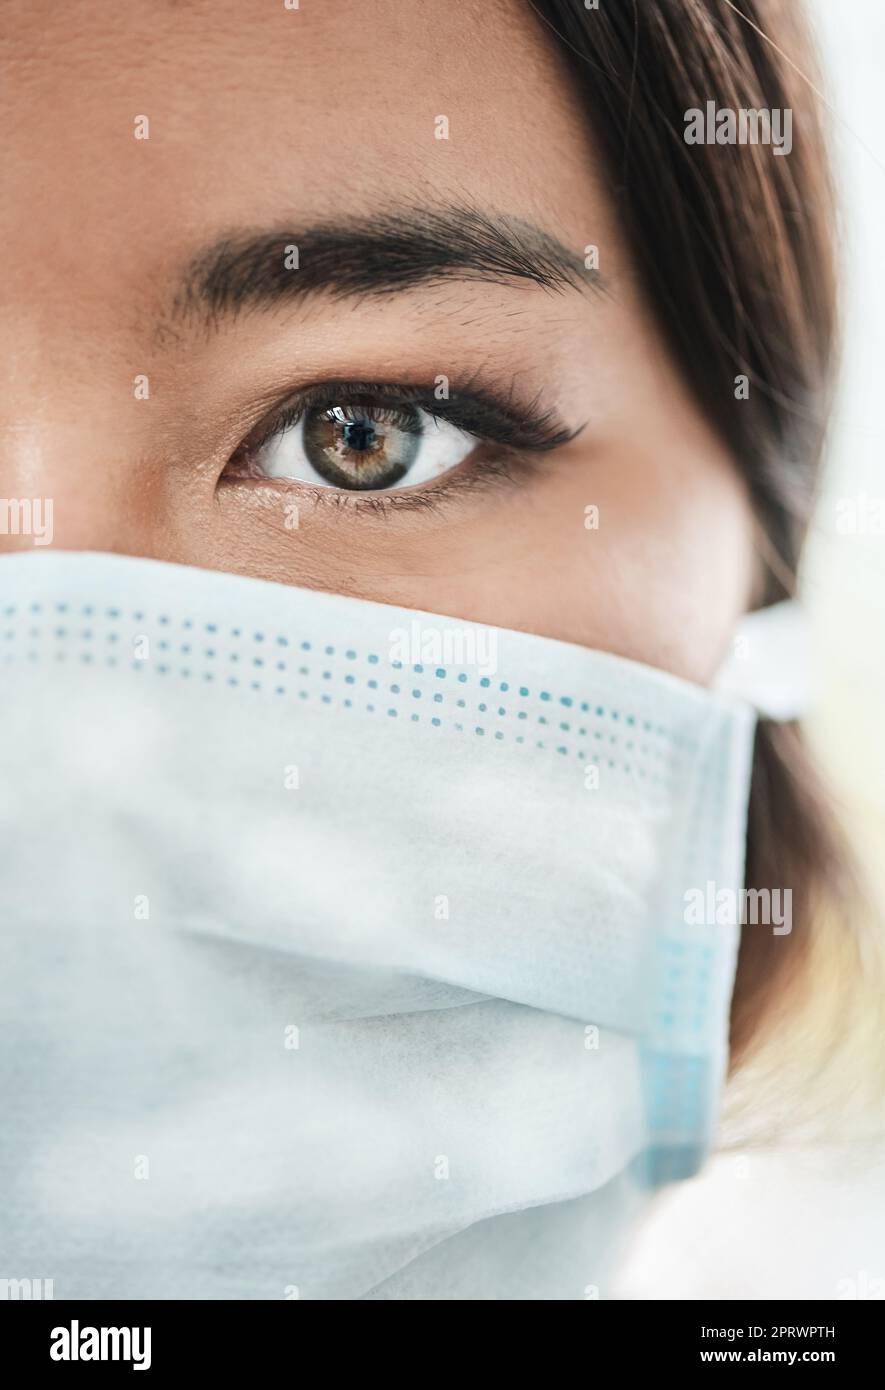 I am because we are. Closeup shot of a womans eye while wearing a mask on her face. Stock Photo